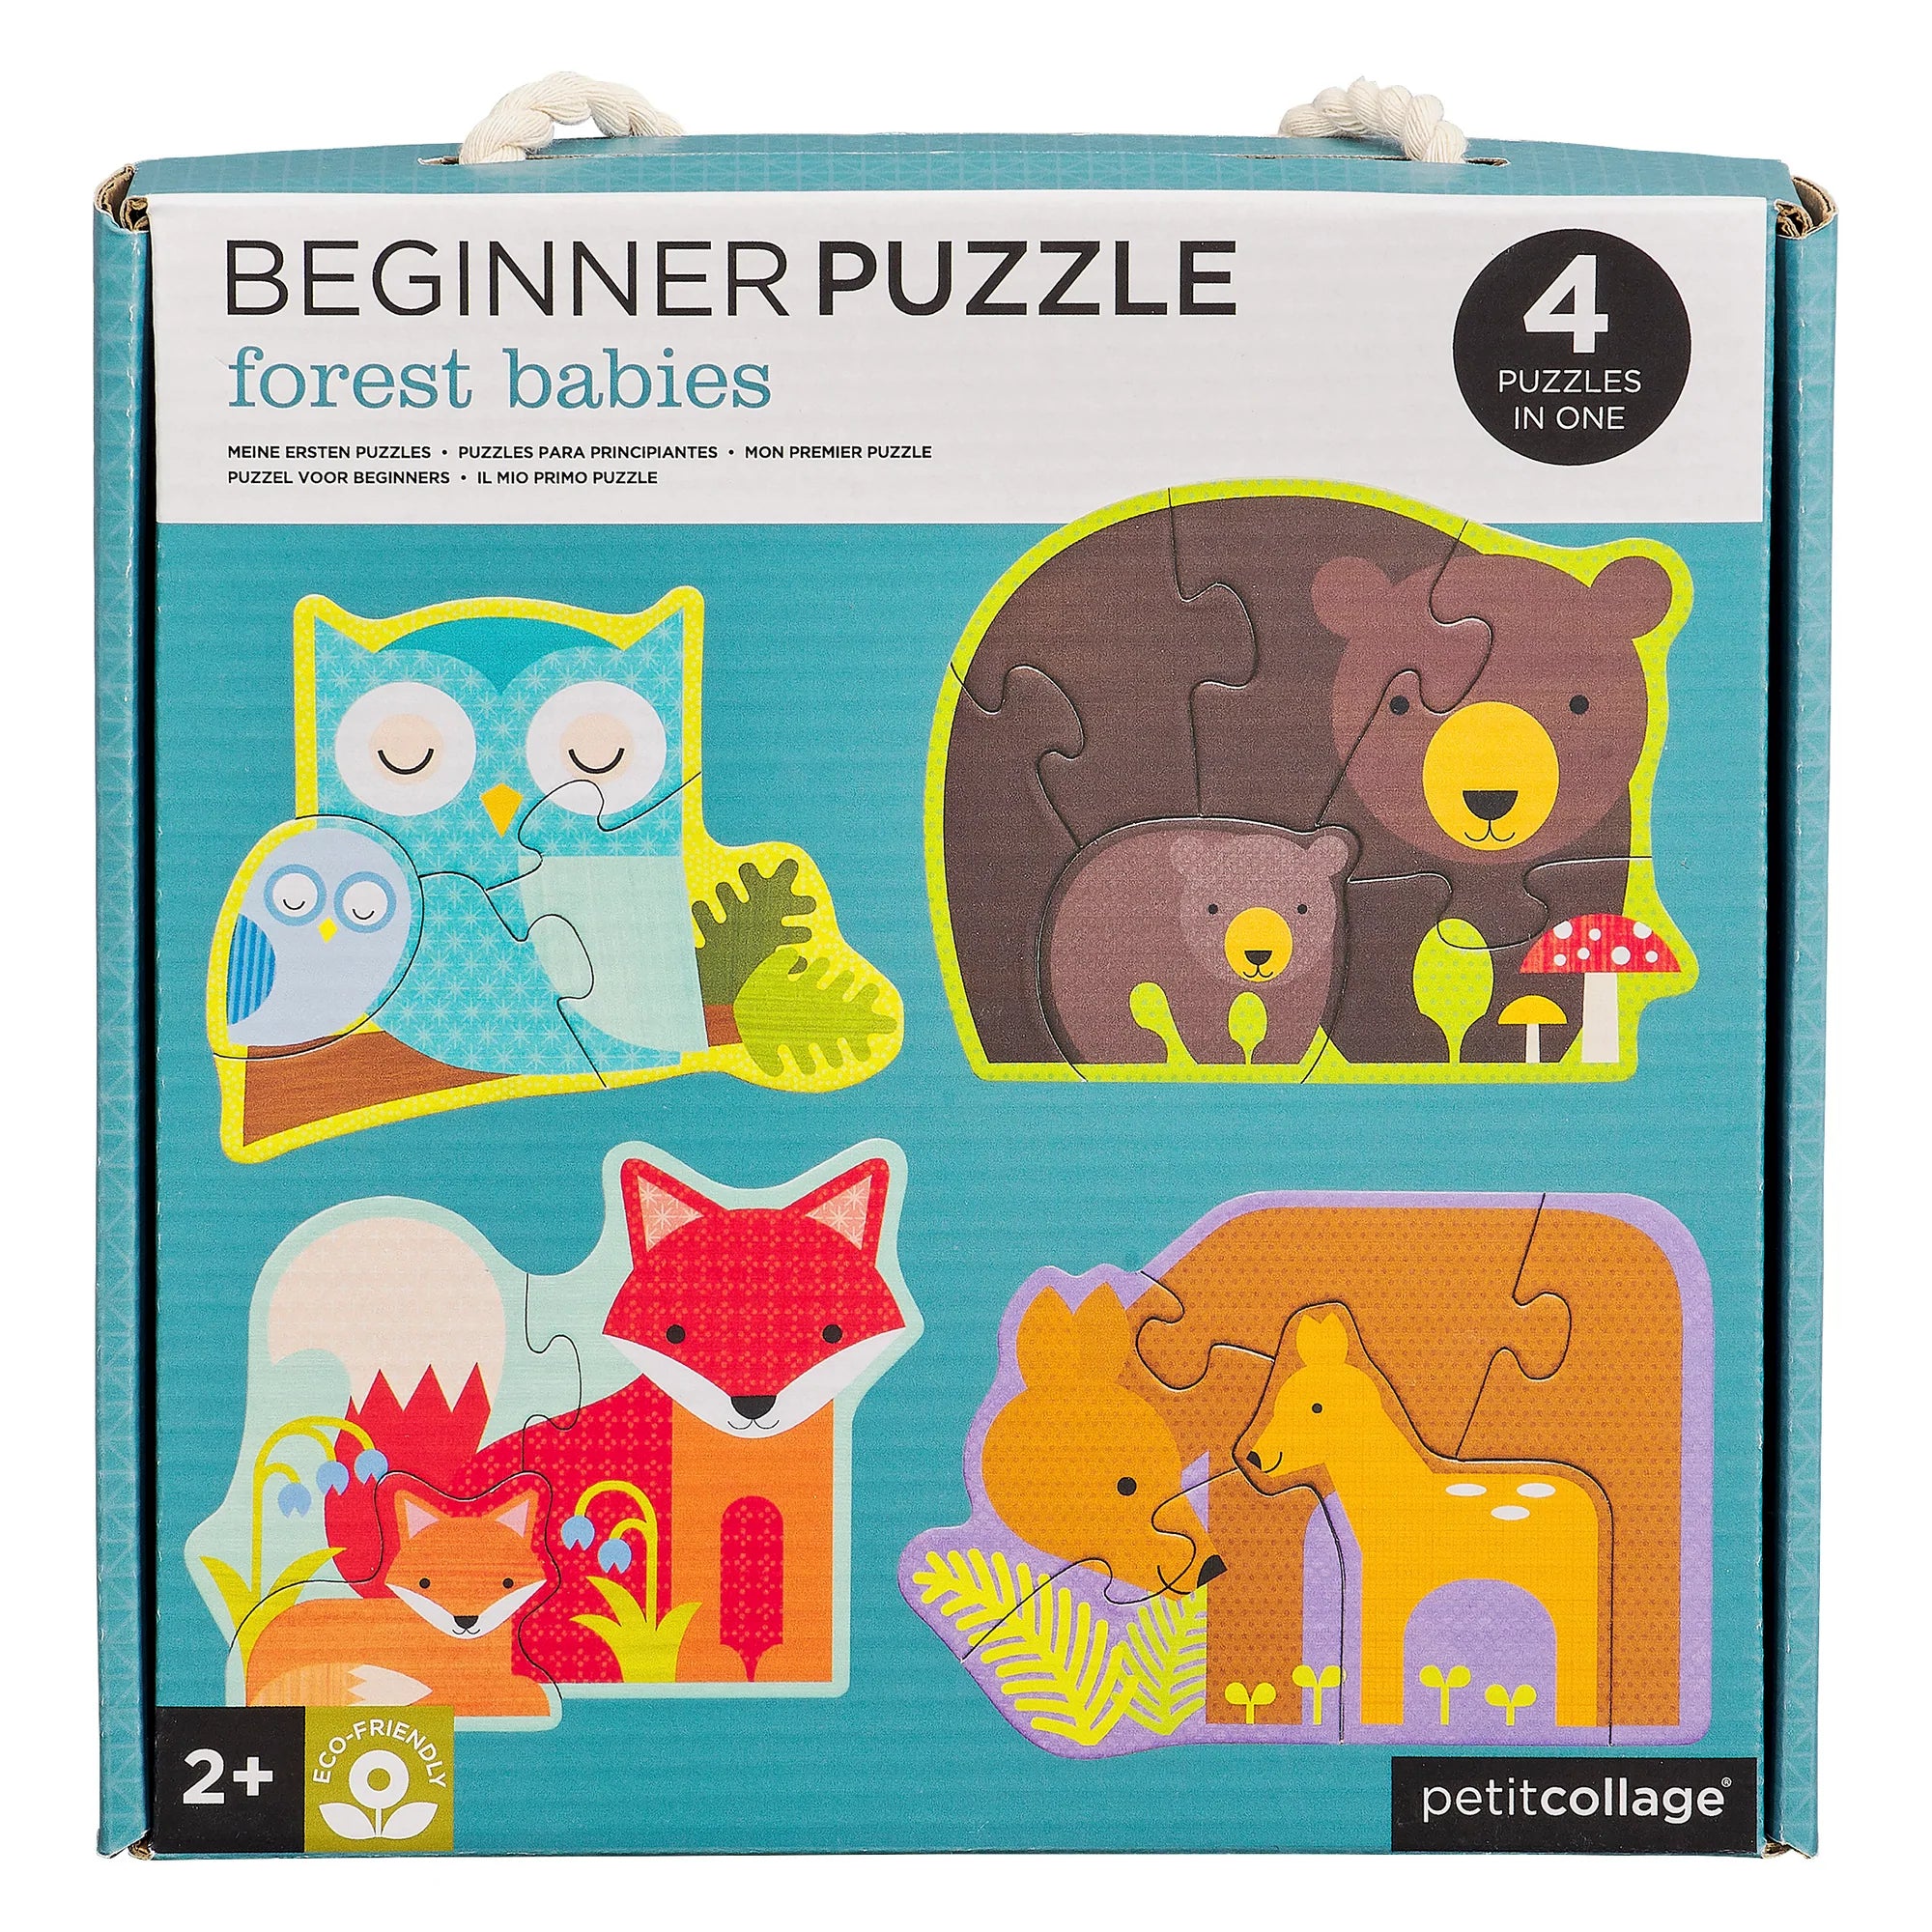 Beginner Puzzle: Forest Babies